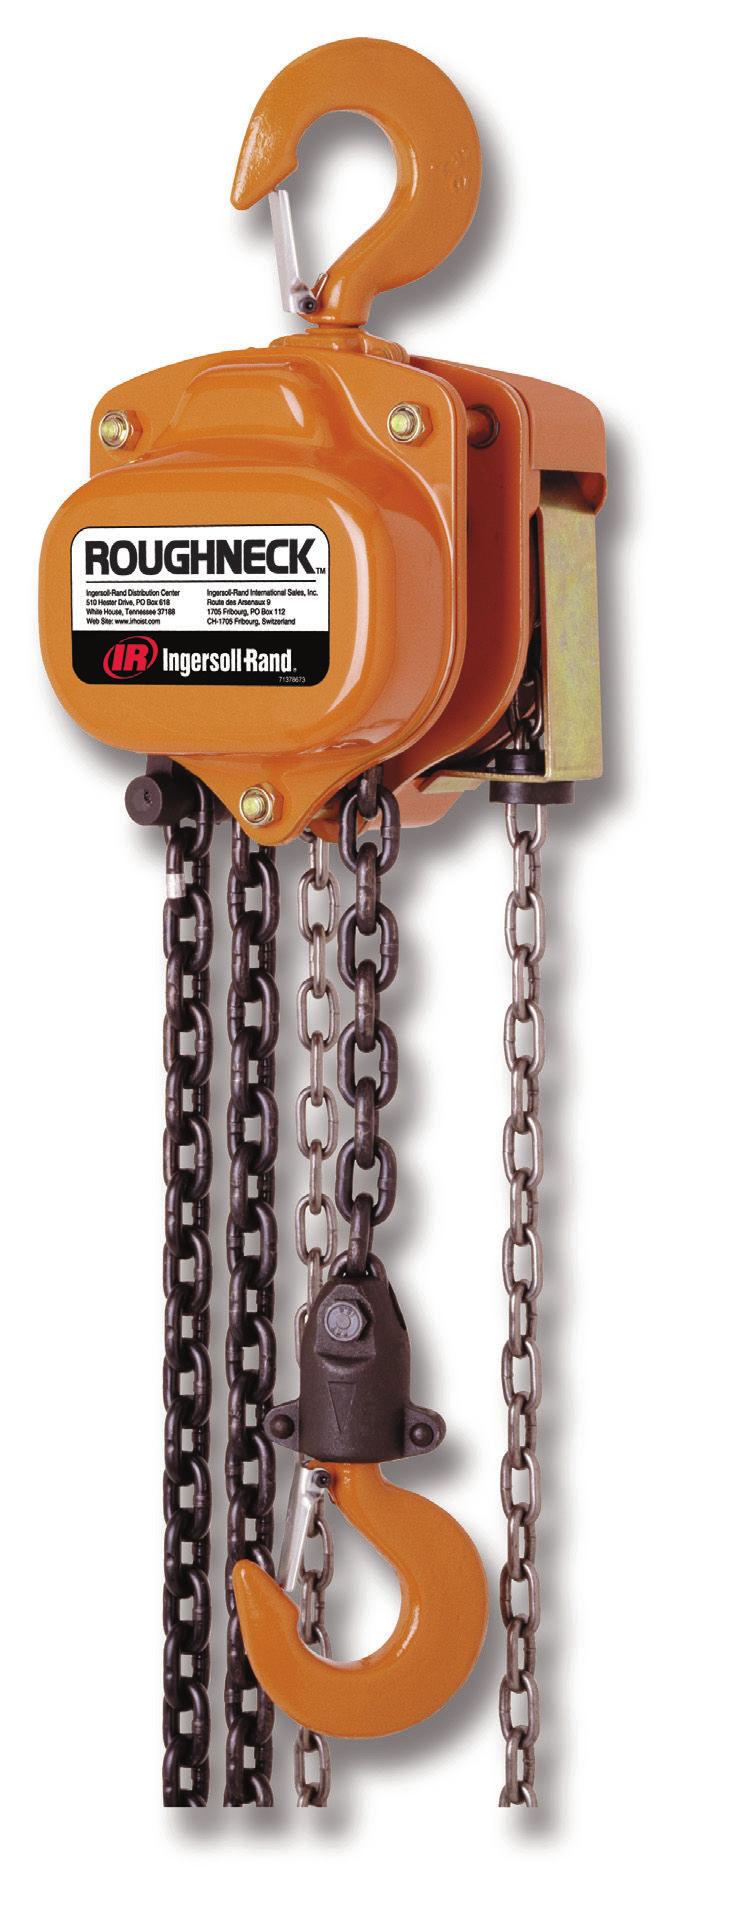 VL2 Premium Series Manual hain Hoist 1/2 20 metric ton Lifting apacity eatures: Our top of the line manual chain hoist, the VL2 Series exclusive hand chain guide provides smooth, even operation and